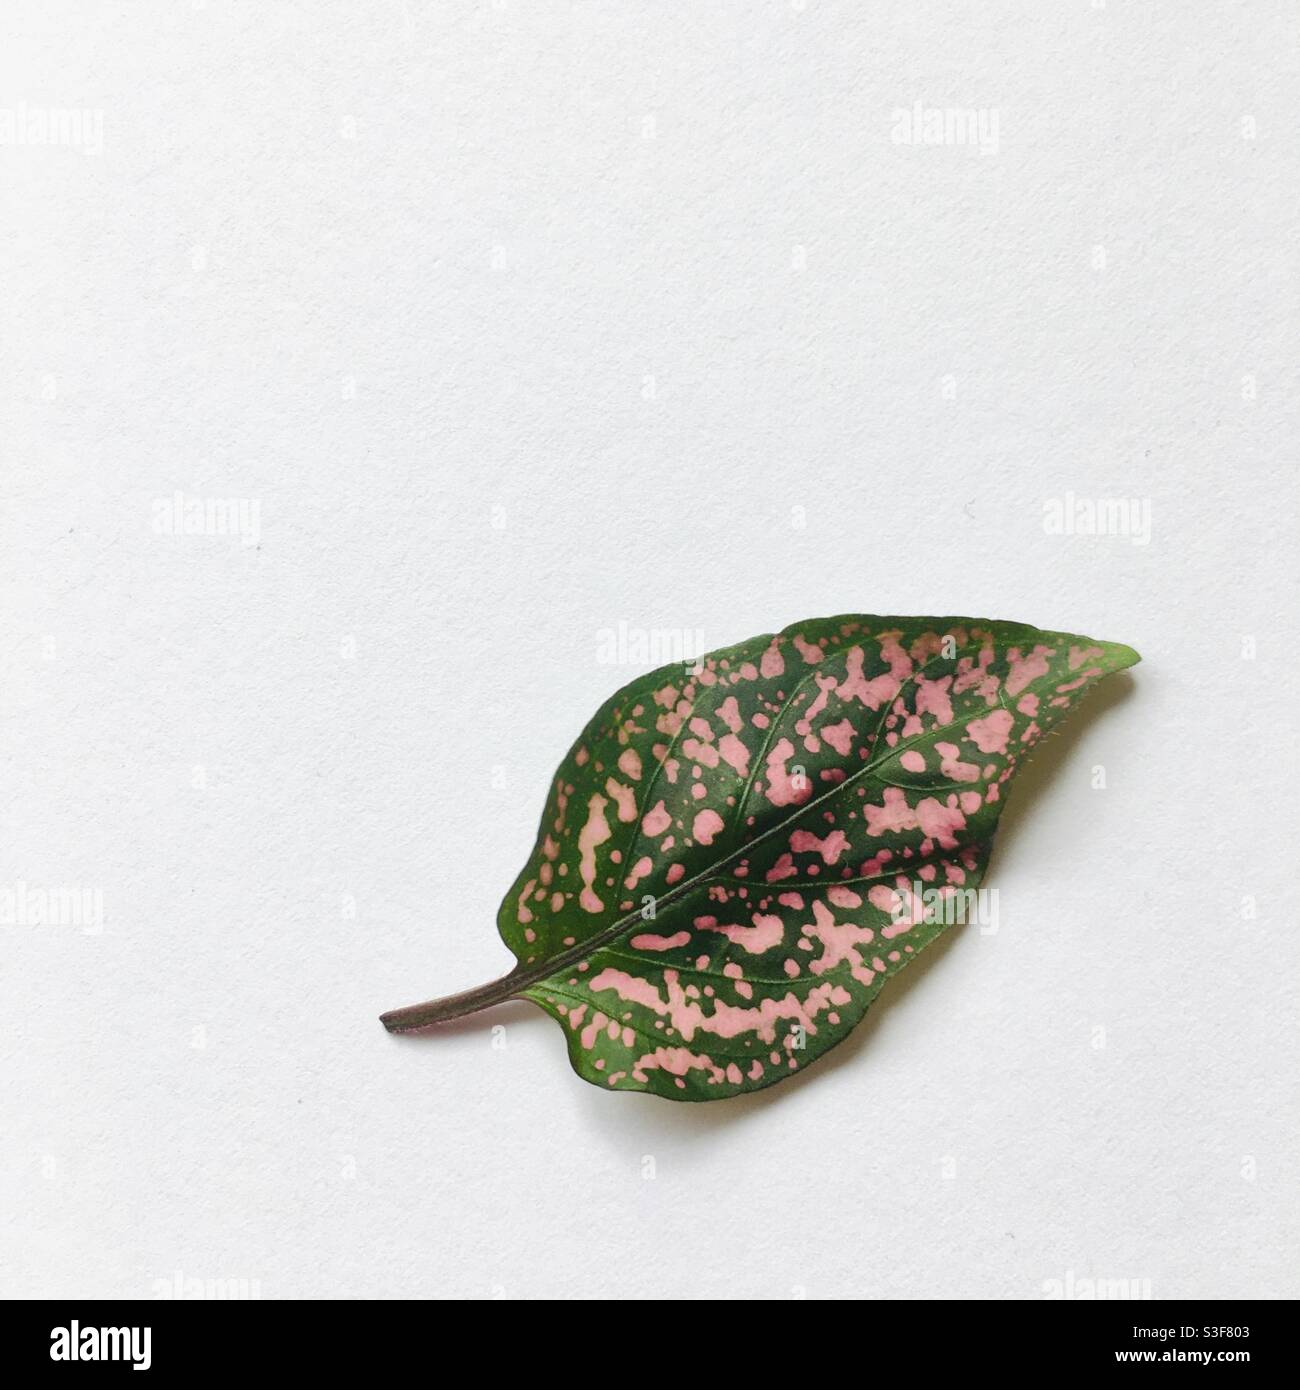 Single pink and green polka dot plant (hypoestes phyllostachya) leaf on a plain white background. Stock Photo